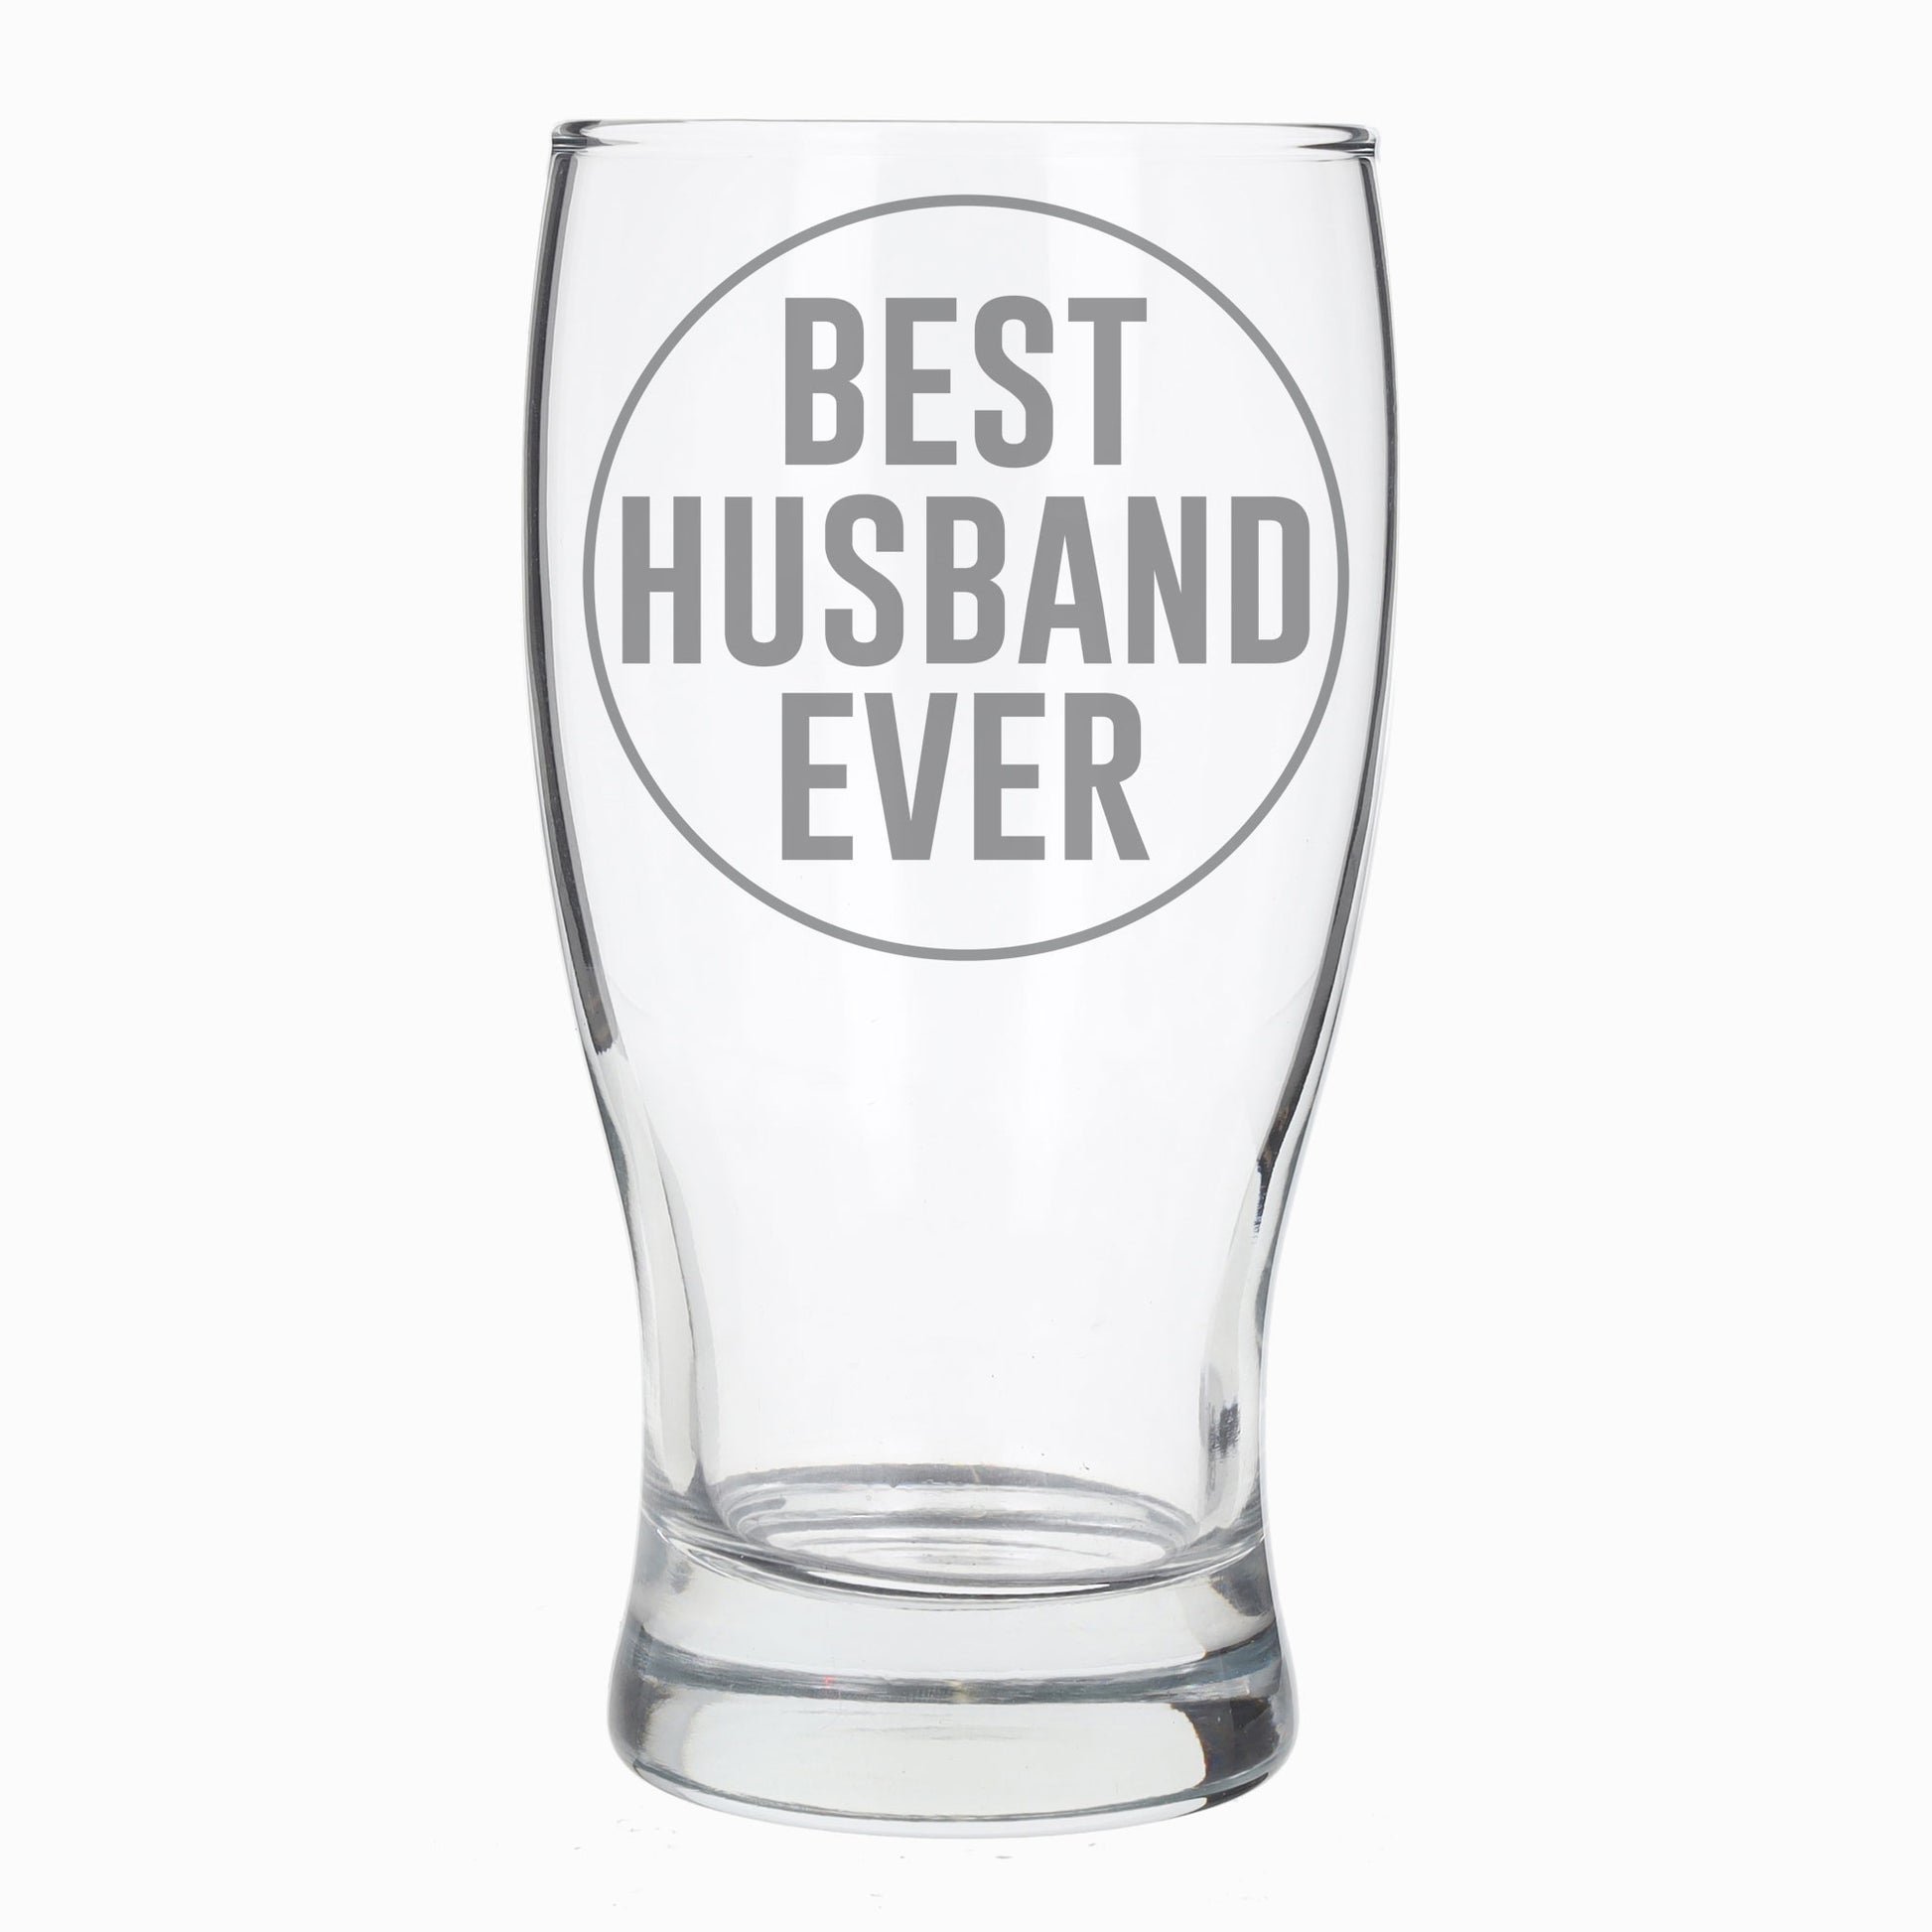 Best Husband Ever Engraved Beer Pint Glass and/or Coaster Set  - Always Looking Good - Beer Glass Only  